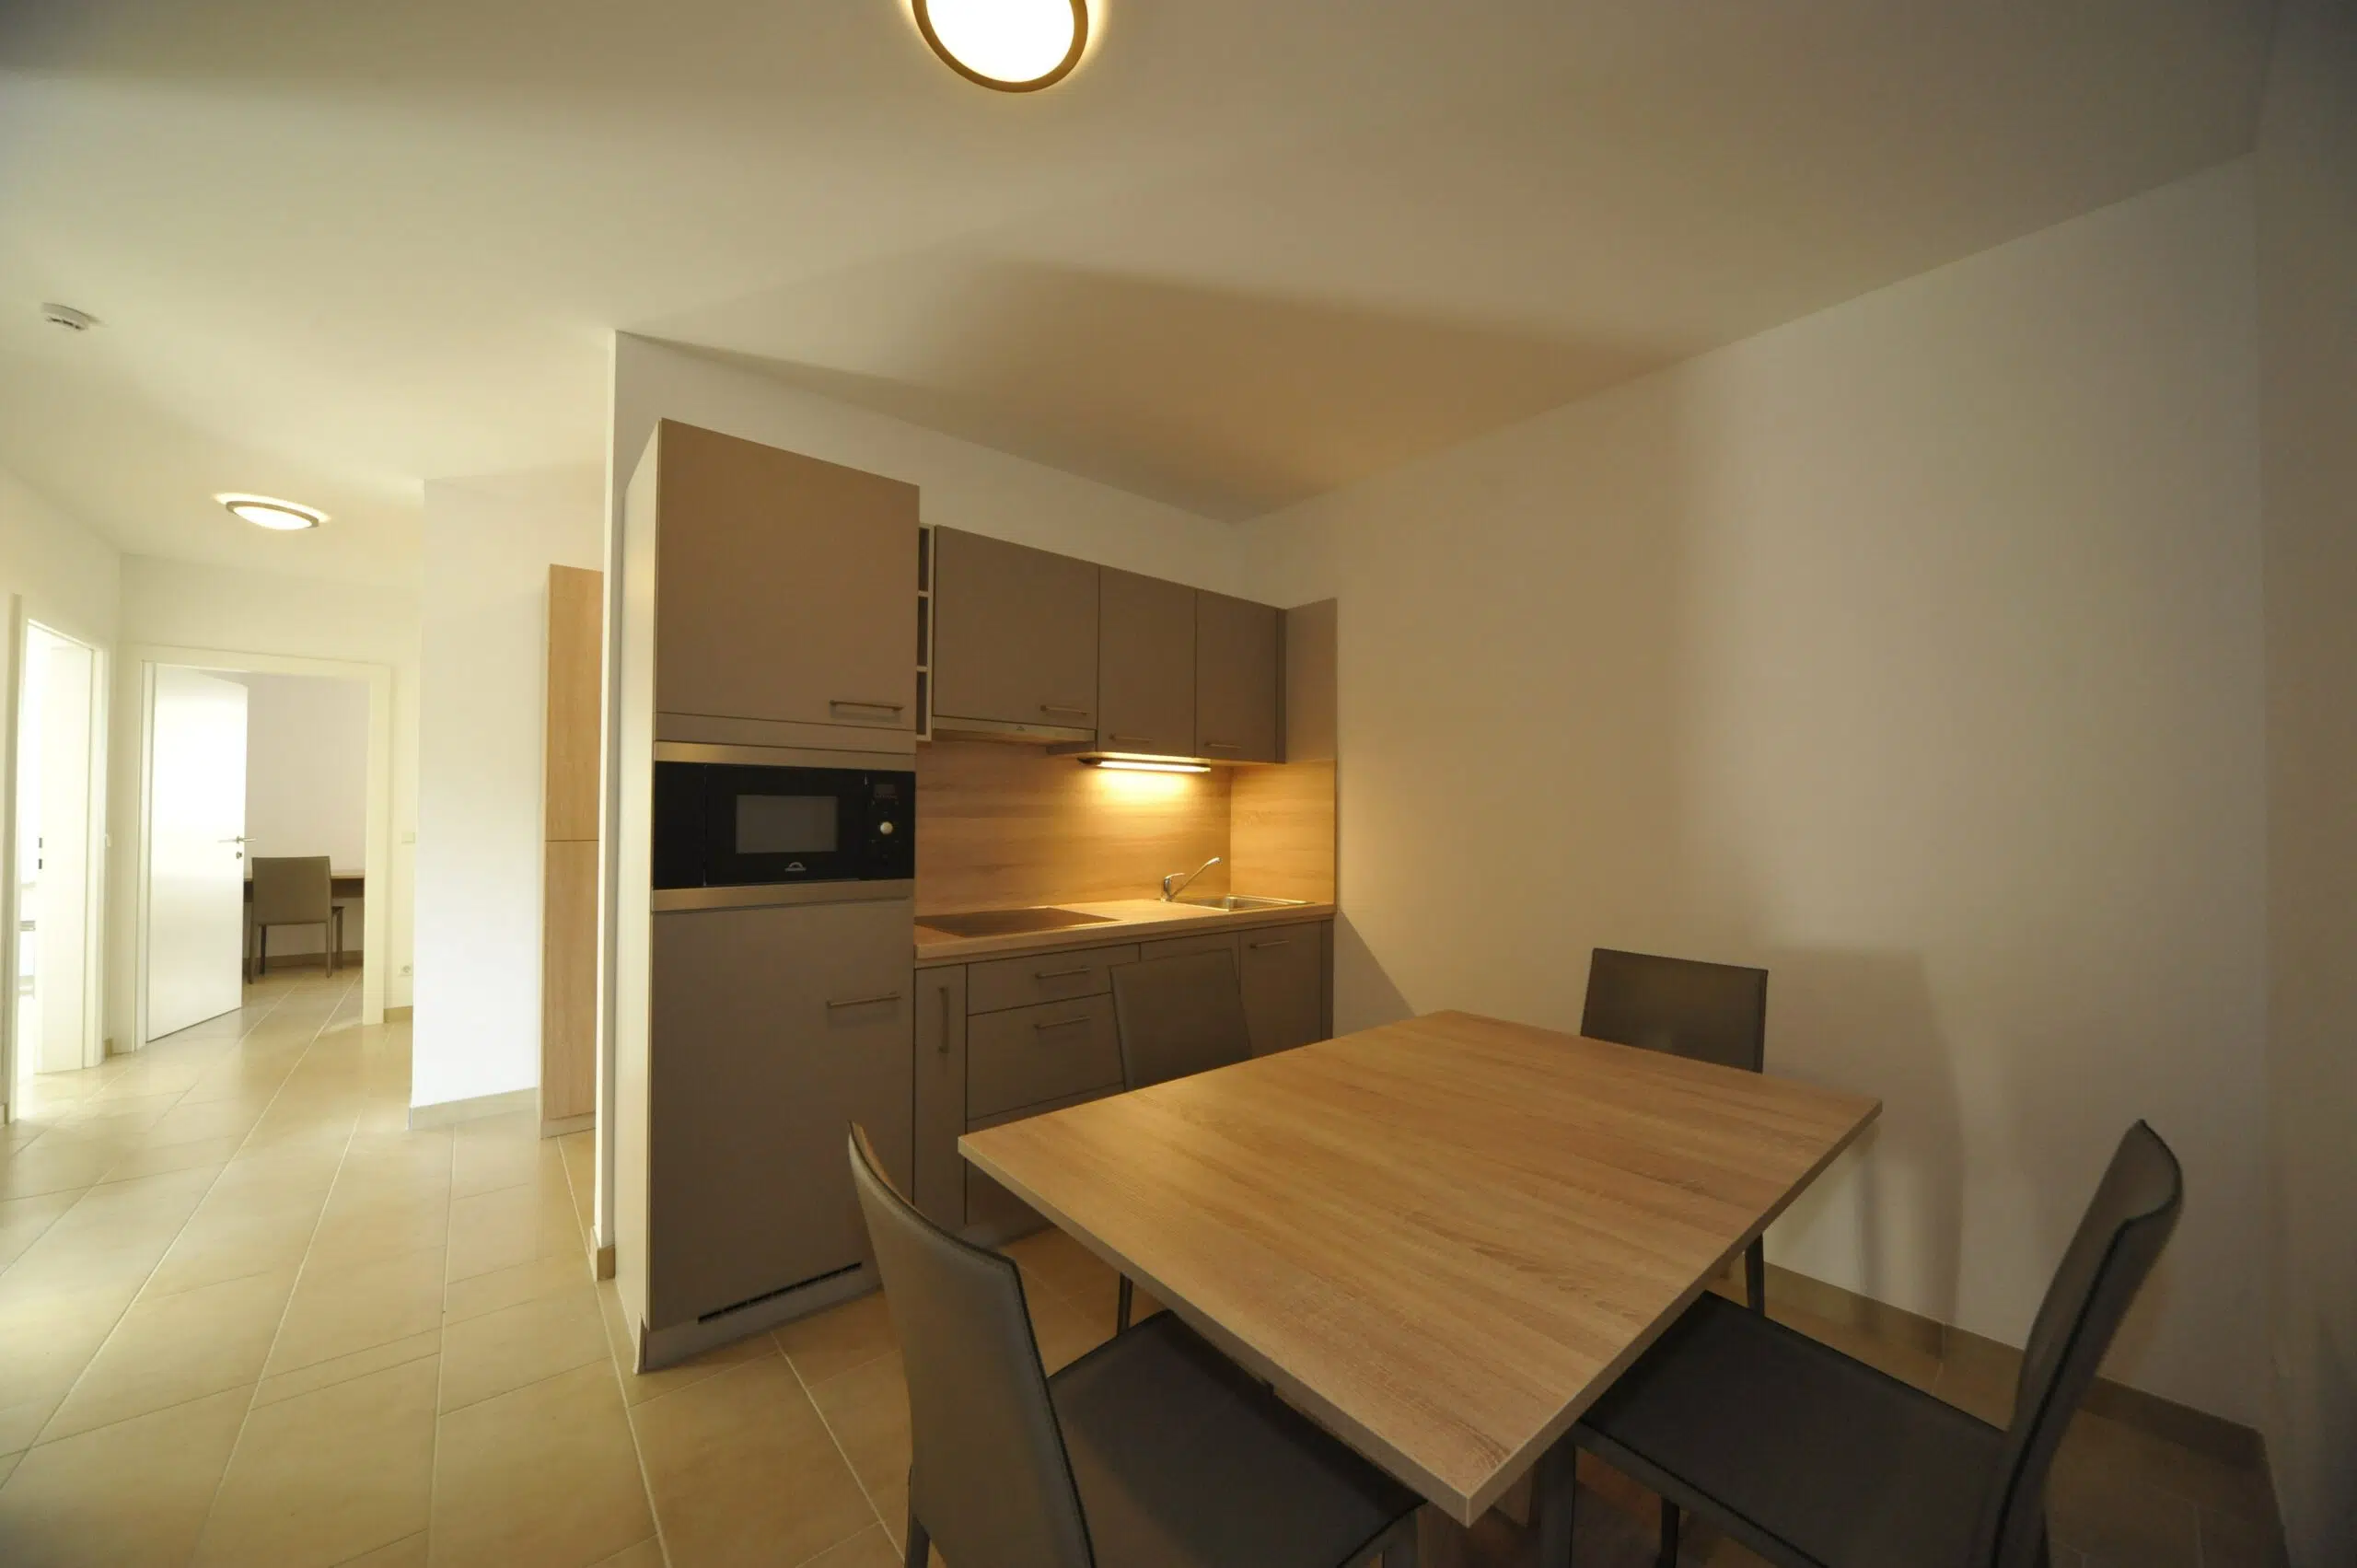 Kitchen with dining table Fitters in graz